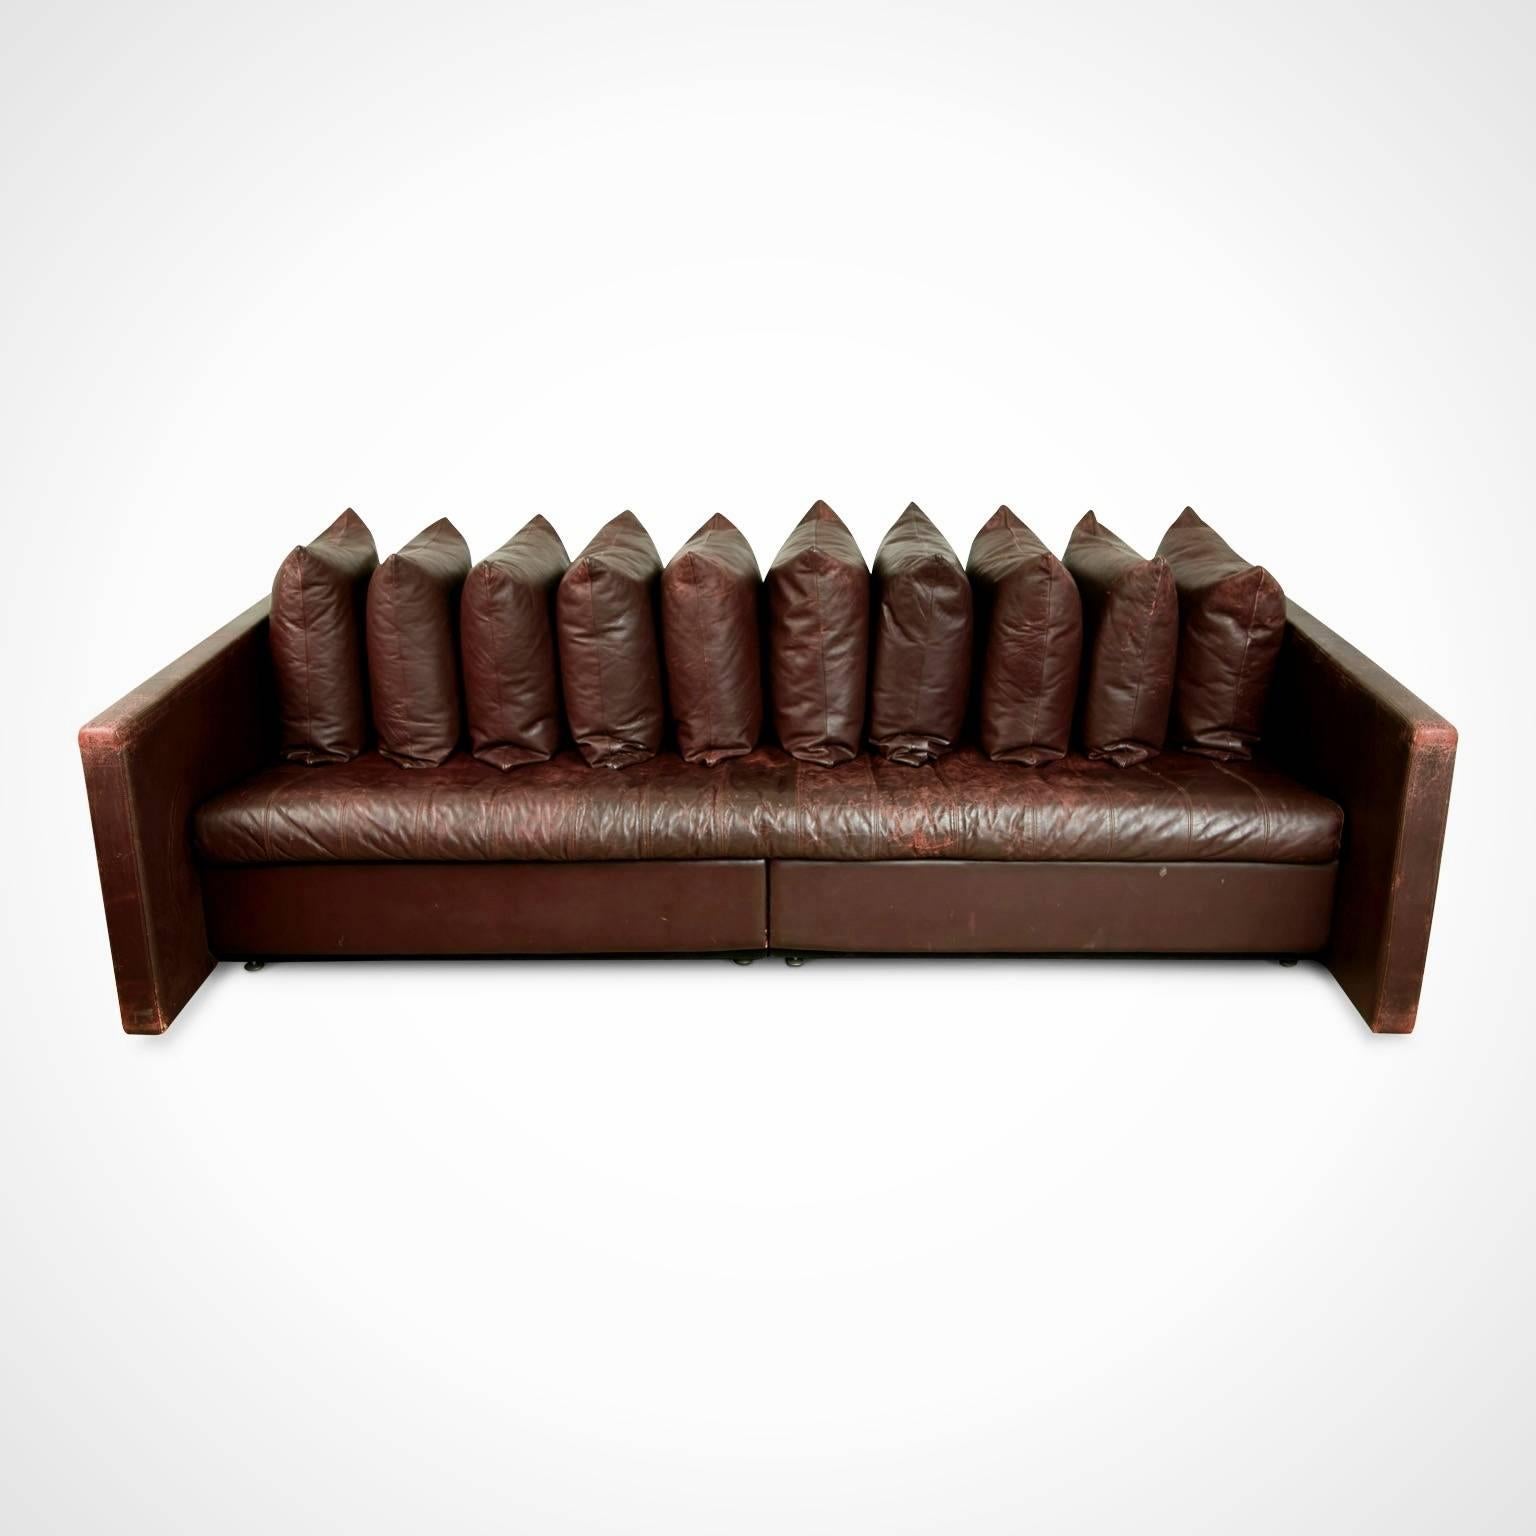 Exquisite ten pillow cushion architectural sofa by Joe D'Urso for Knoll International. Featuring the original deep burgundy cordovan leather upholstery that has built up an admirable patina over time. These traces of age and use bring more vibrancy